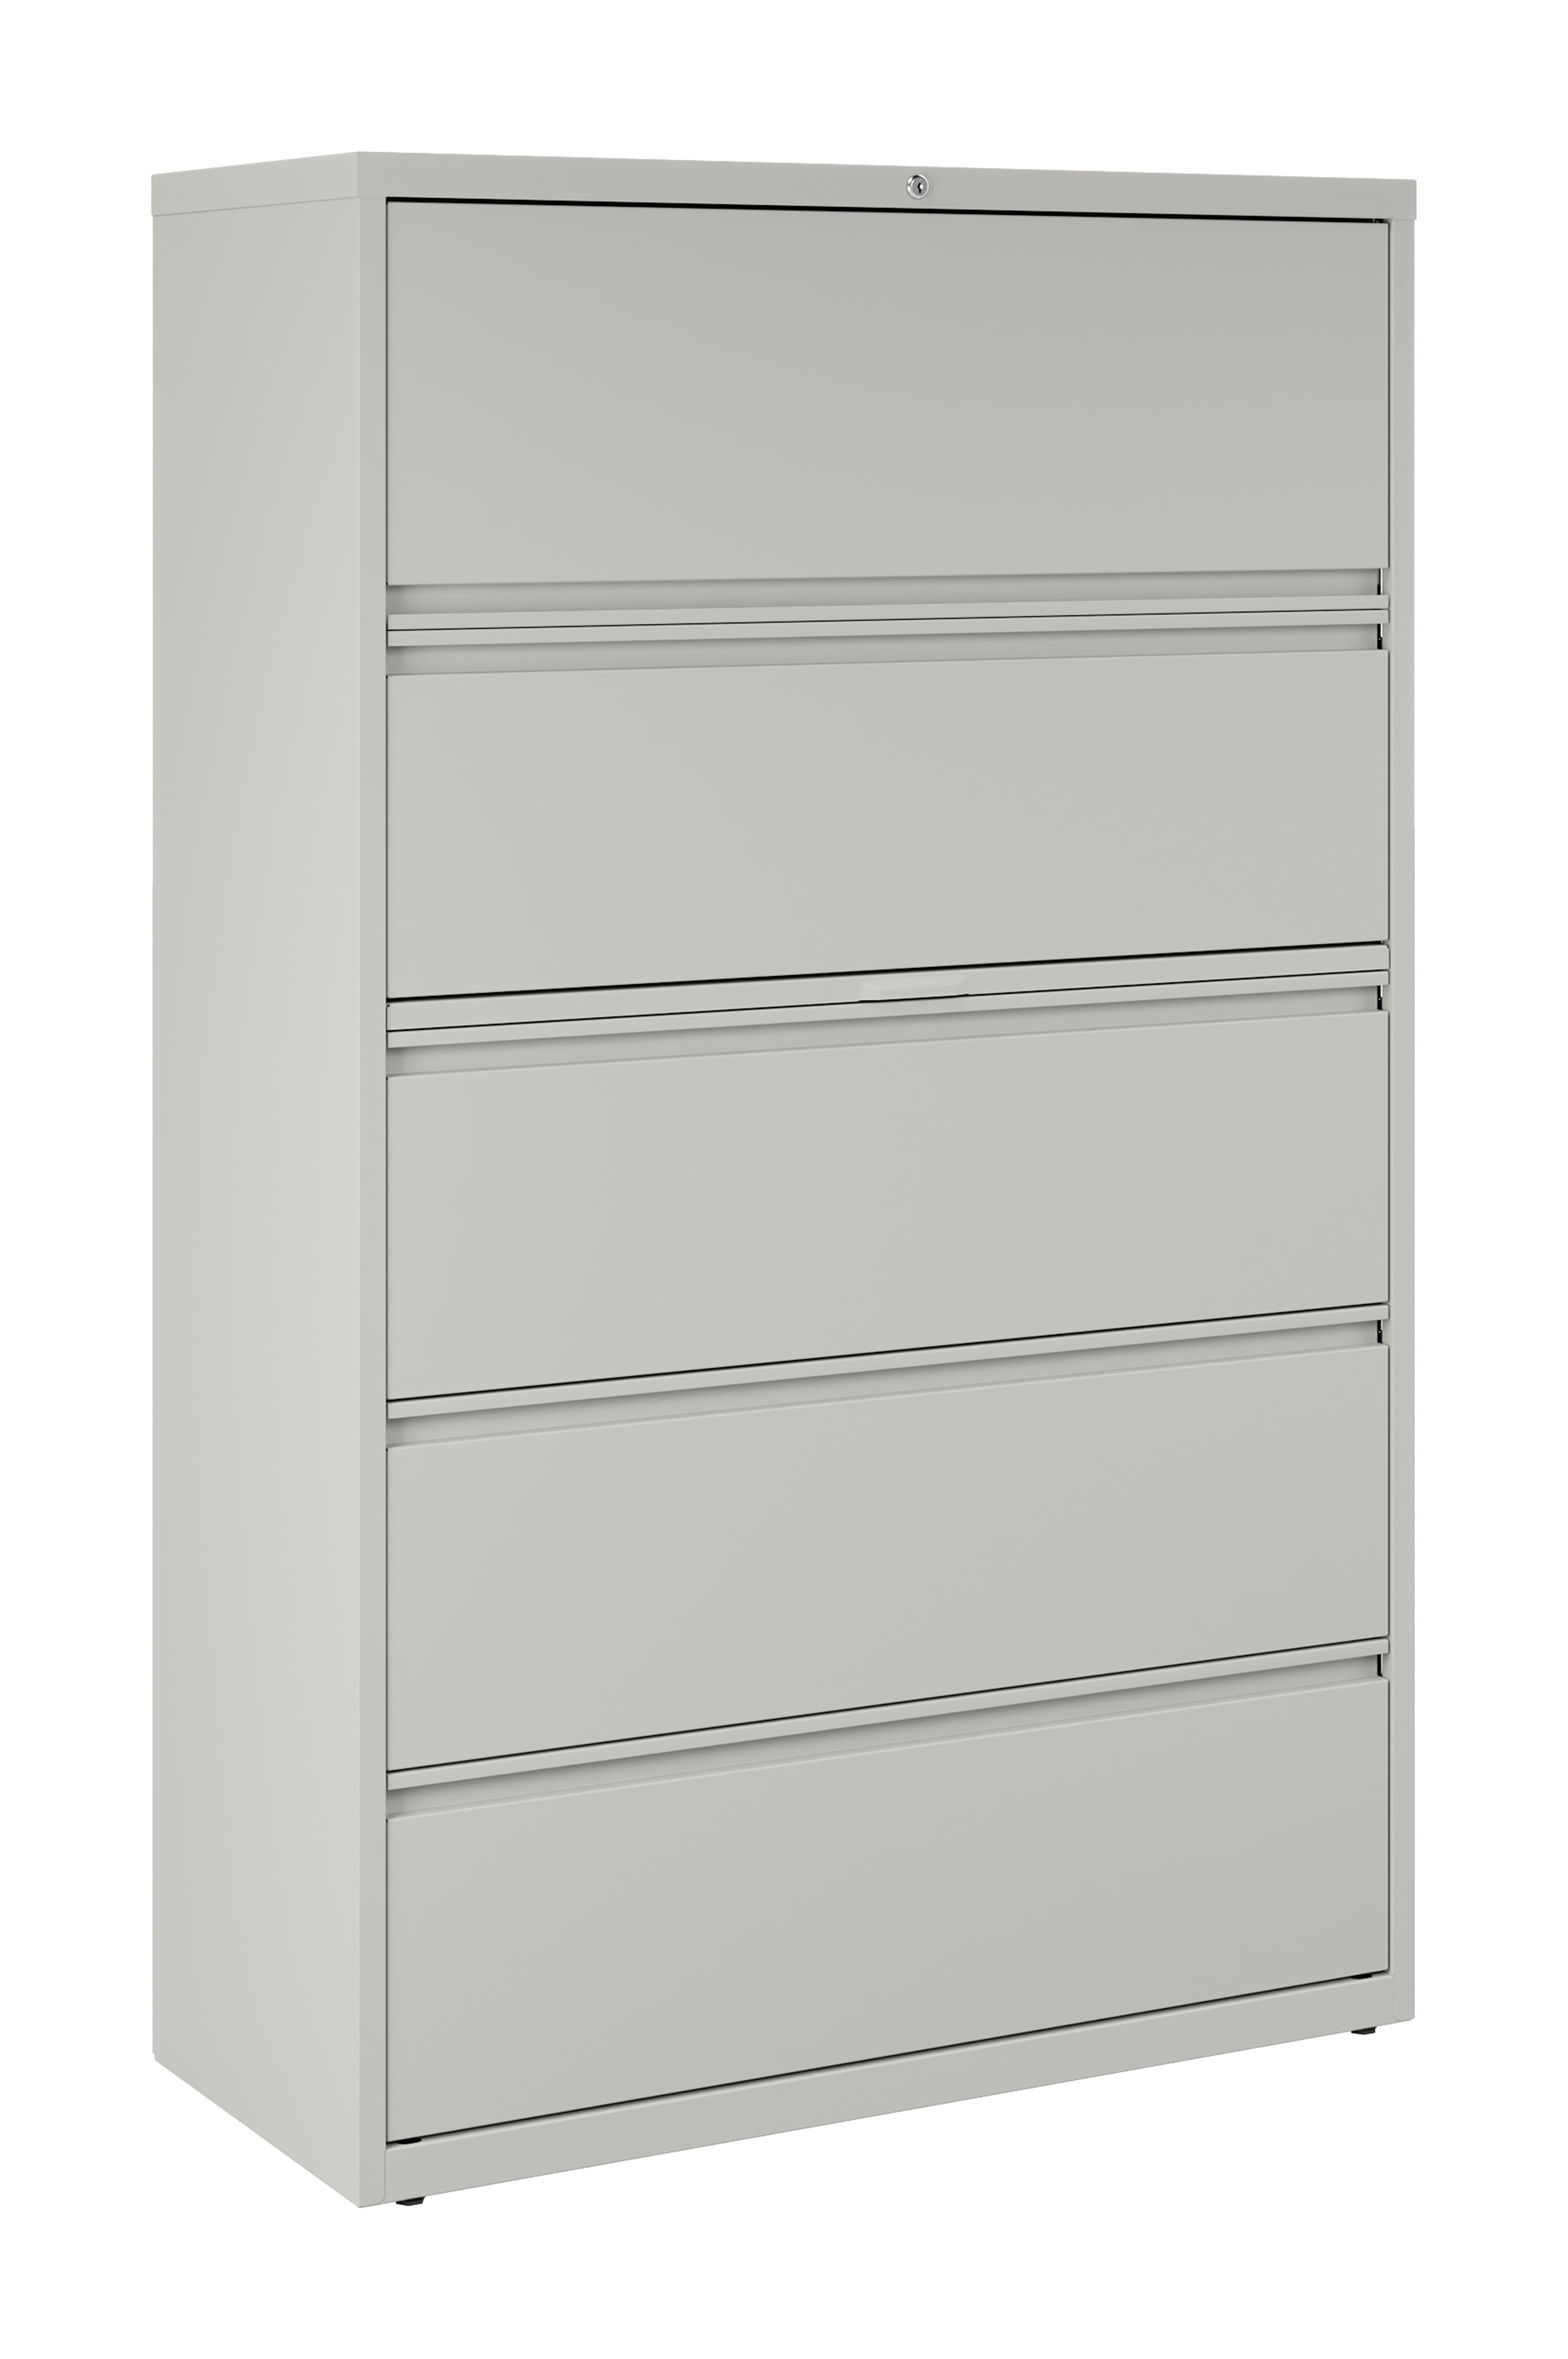 Hirsh 42 inch Wide 5 Drawer Metal Lateral File Cabinet for Home and Office, Holds Letter, Legal and A4 Hanging Folders, Gray - image 1 of 10